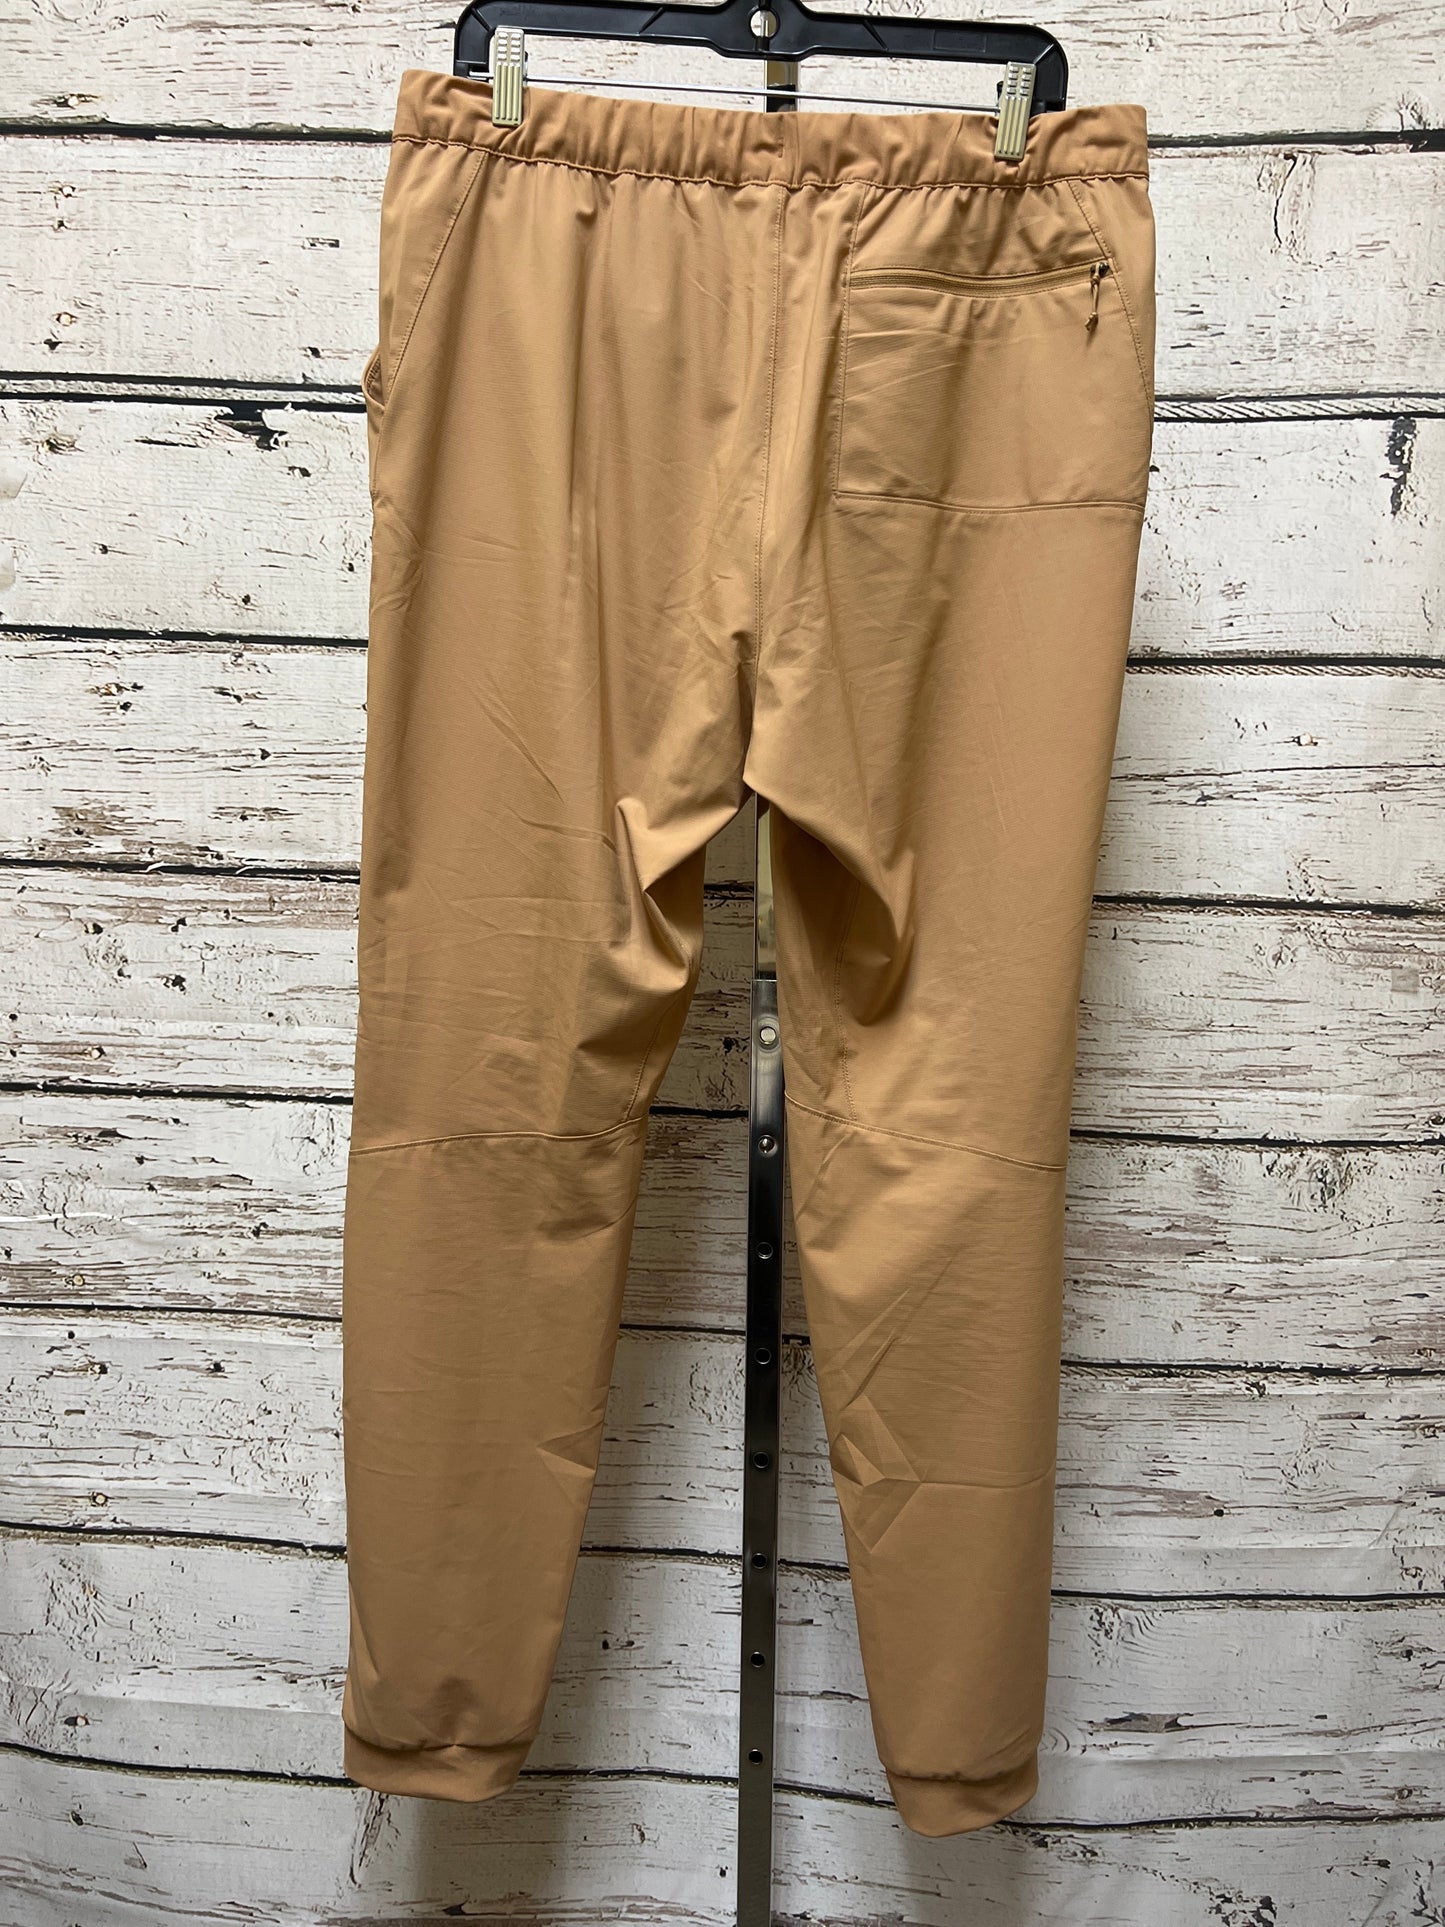 Athletic Pants By Patagonia  Size: L